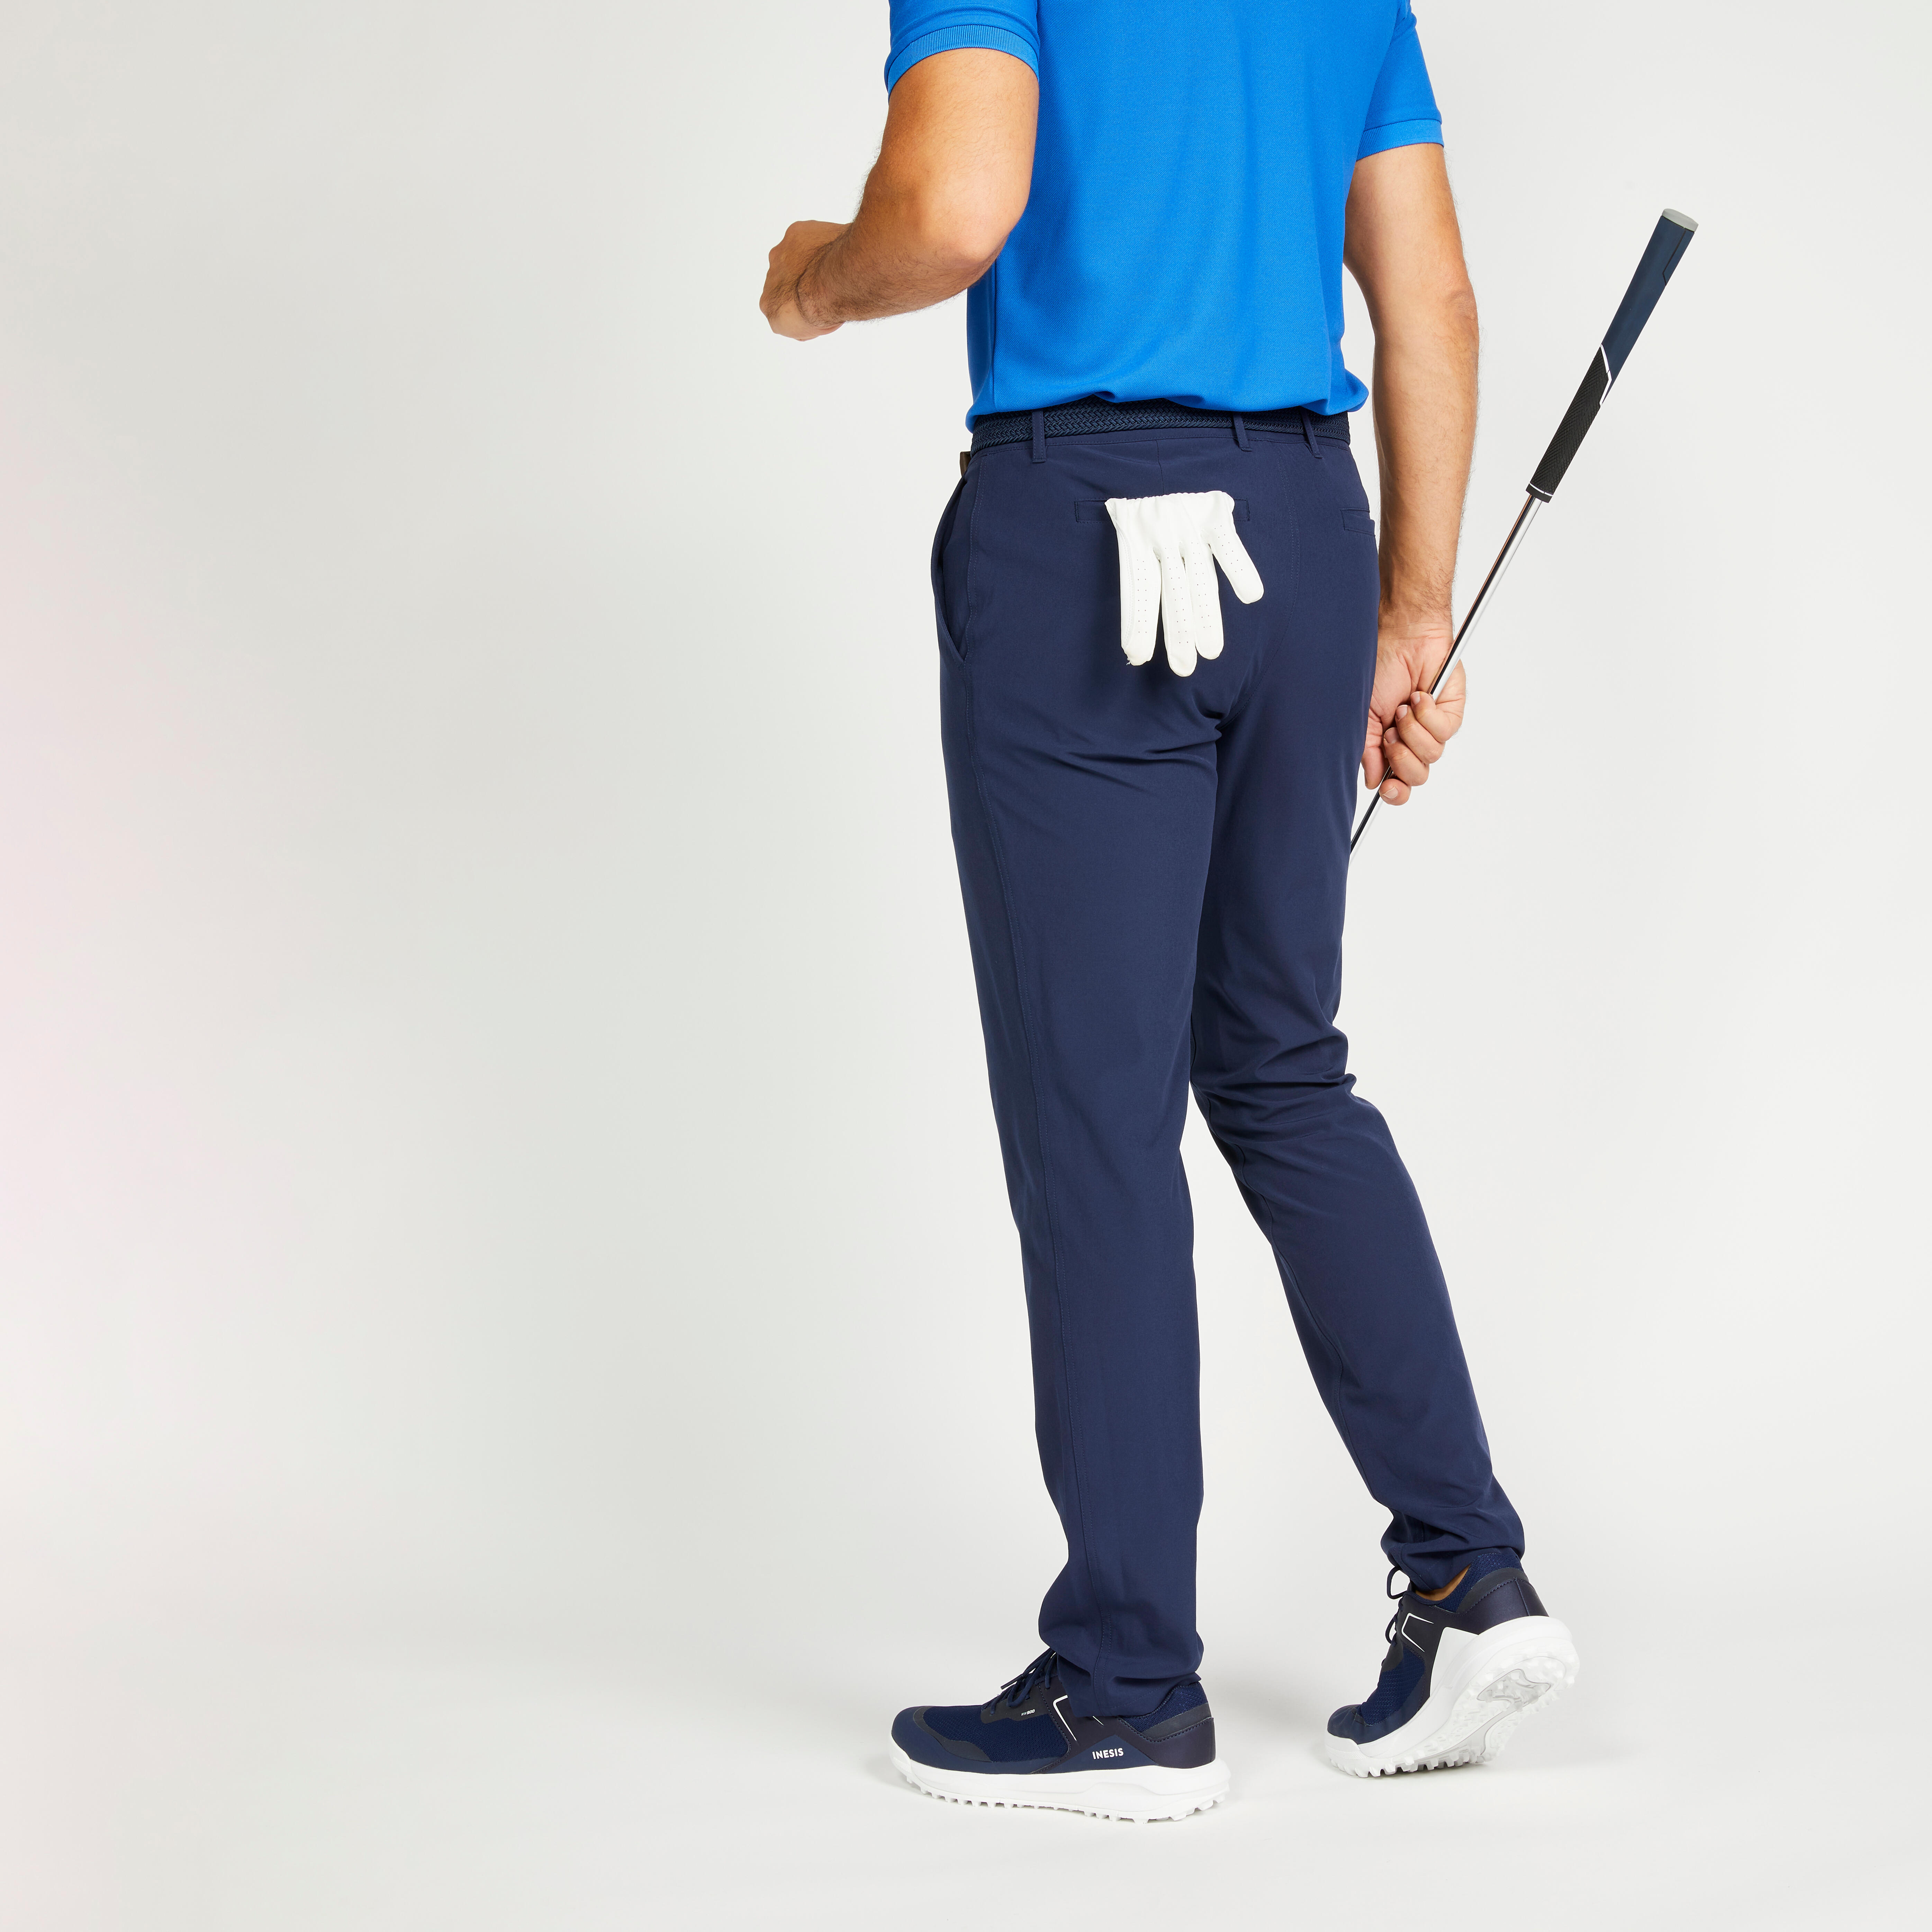 Inesis 8525048 Women's Slim Golf Trousers, UK16 / FR46 L31 (Blue) :  Amazon.in: Clothing & Accessories